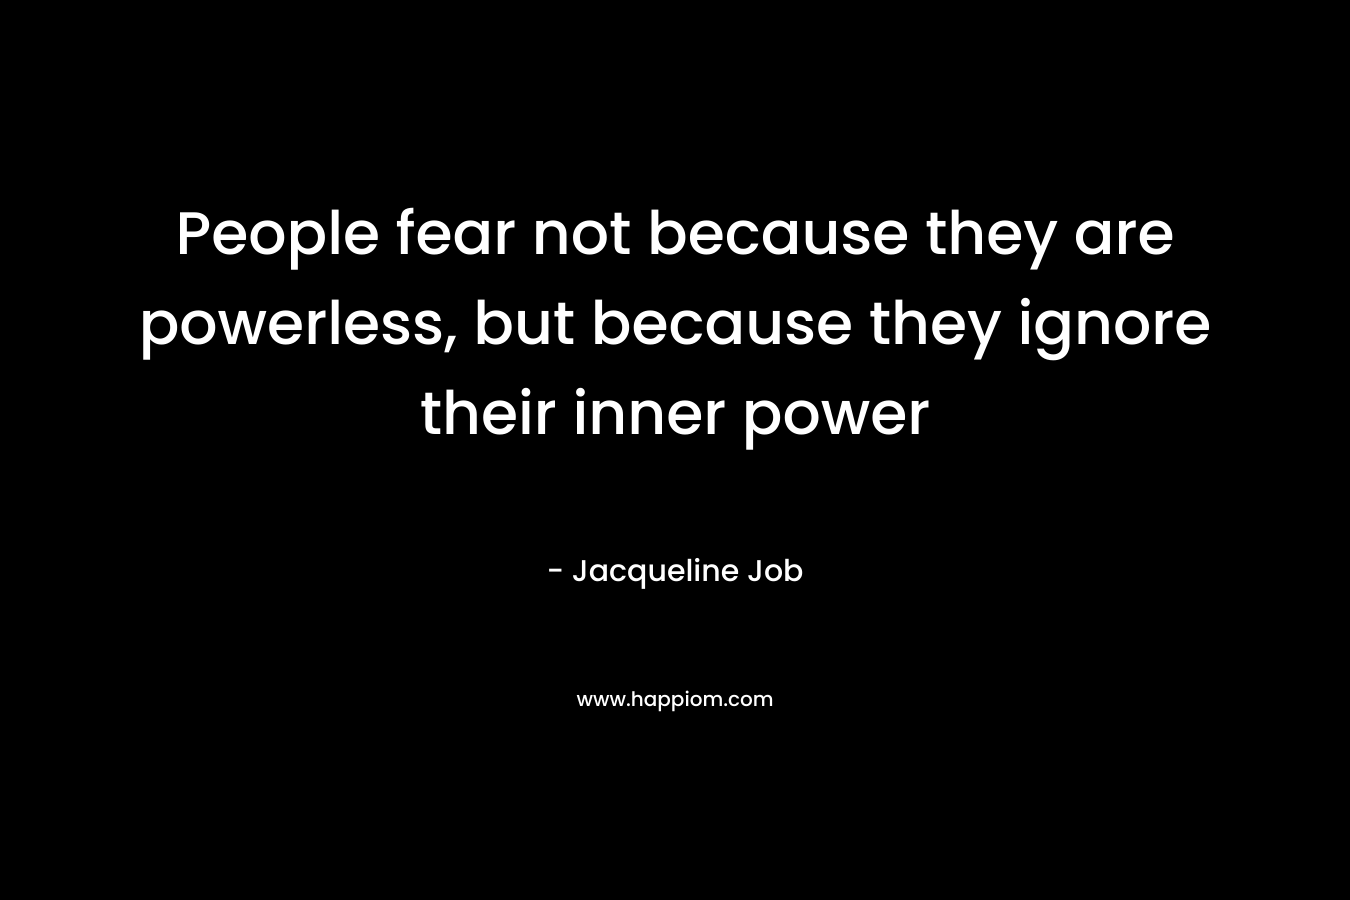 People fear not because they are powerless, but because they ignore their inner power